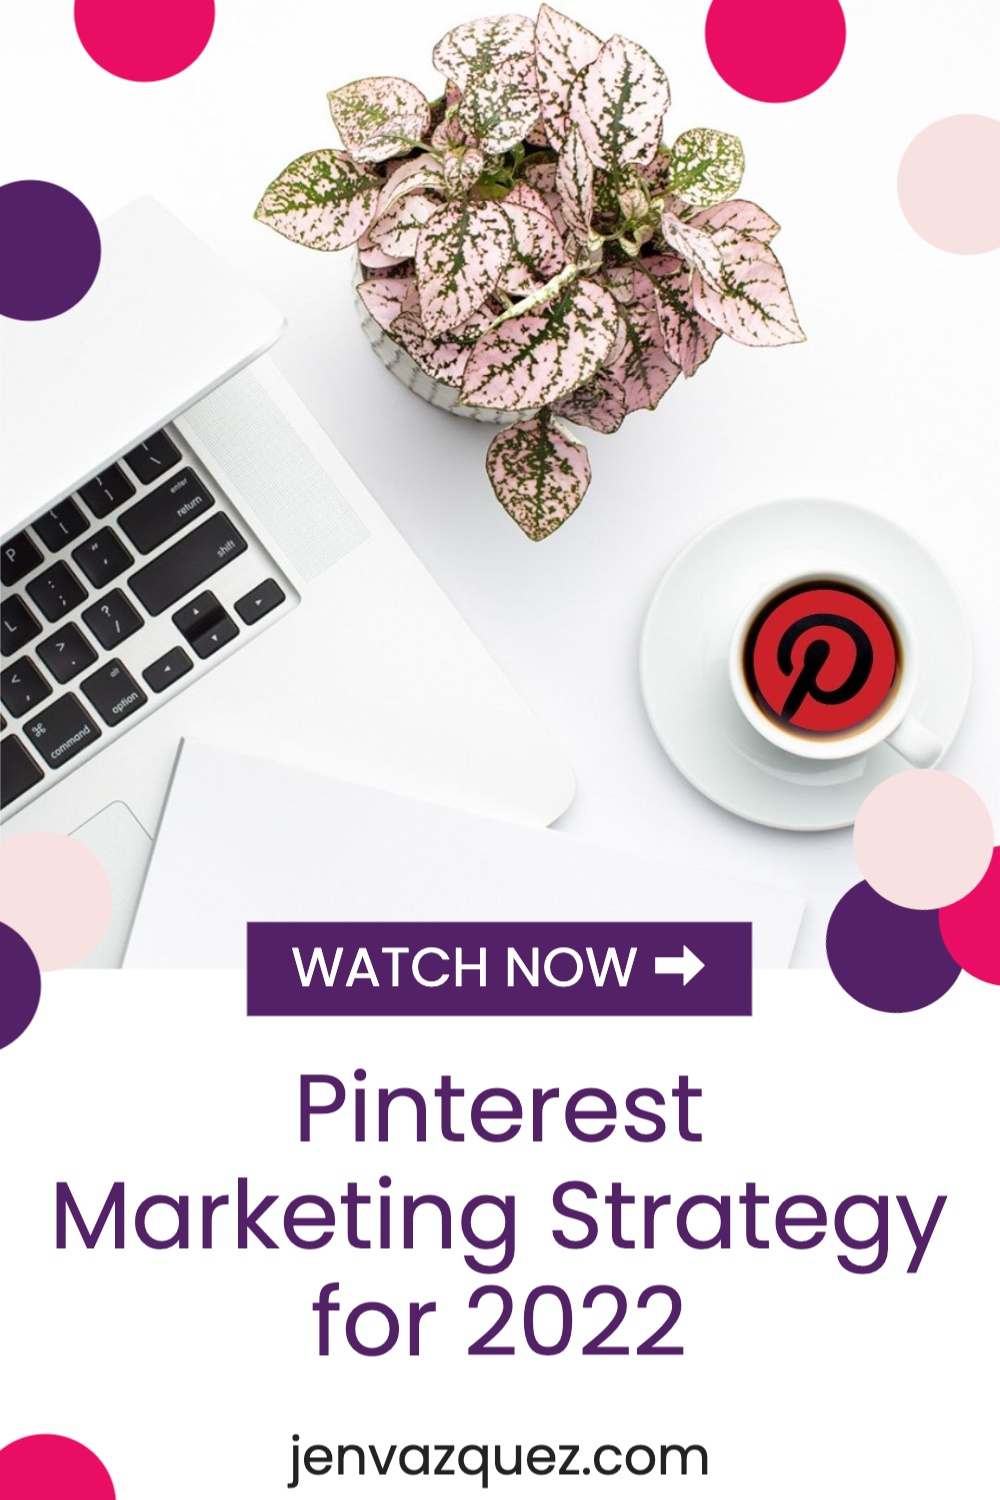 The most effective Pinterest Marketing Strategy for 2022